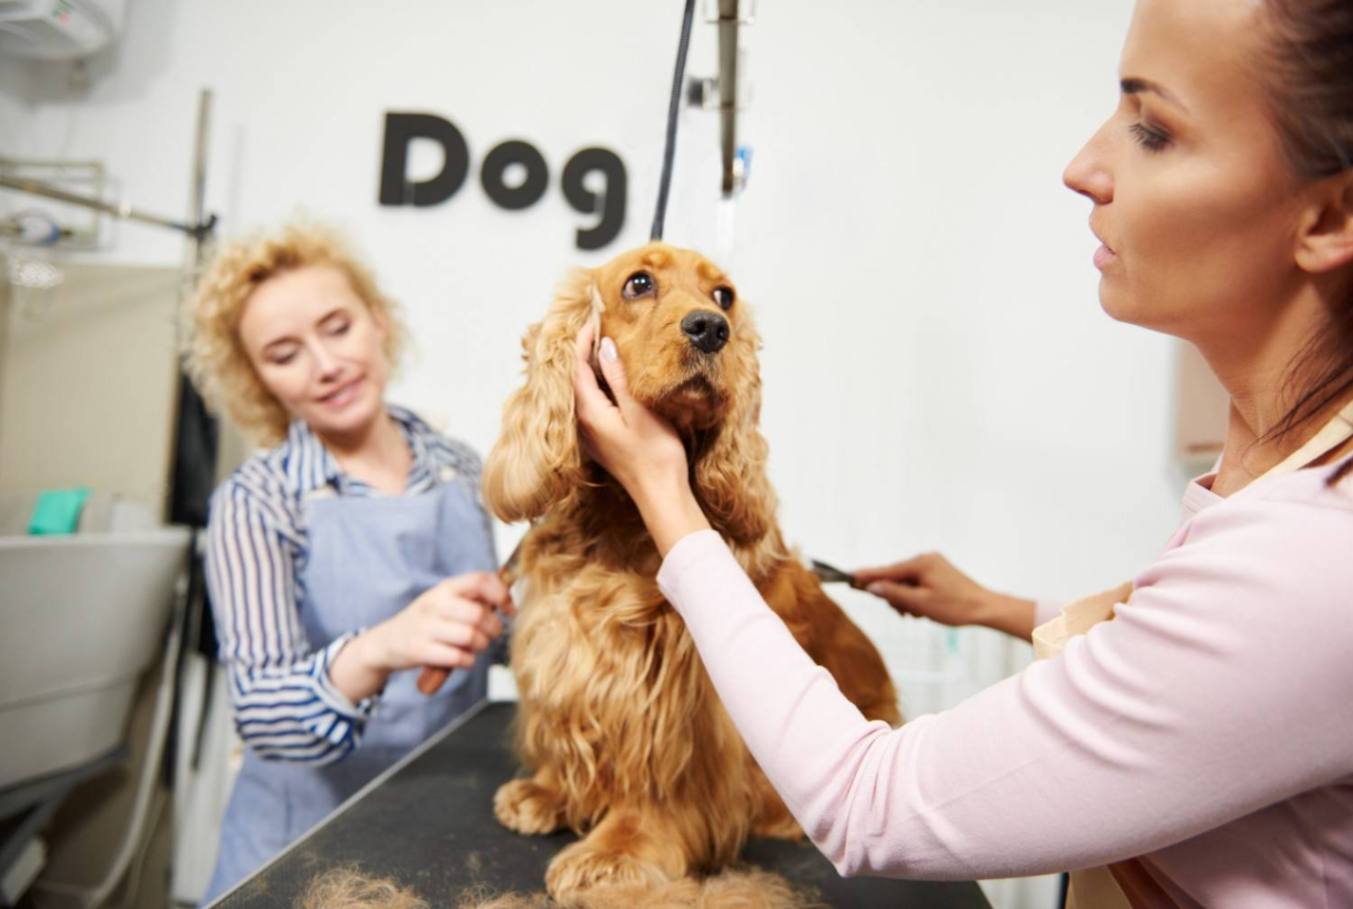 How Can Pet Groomers Effectively Communicate With Pet Parents?